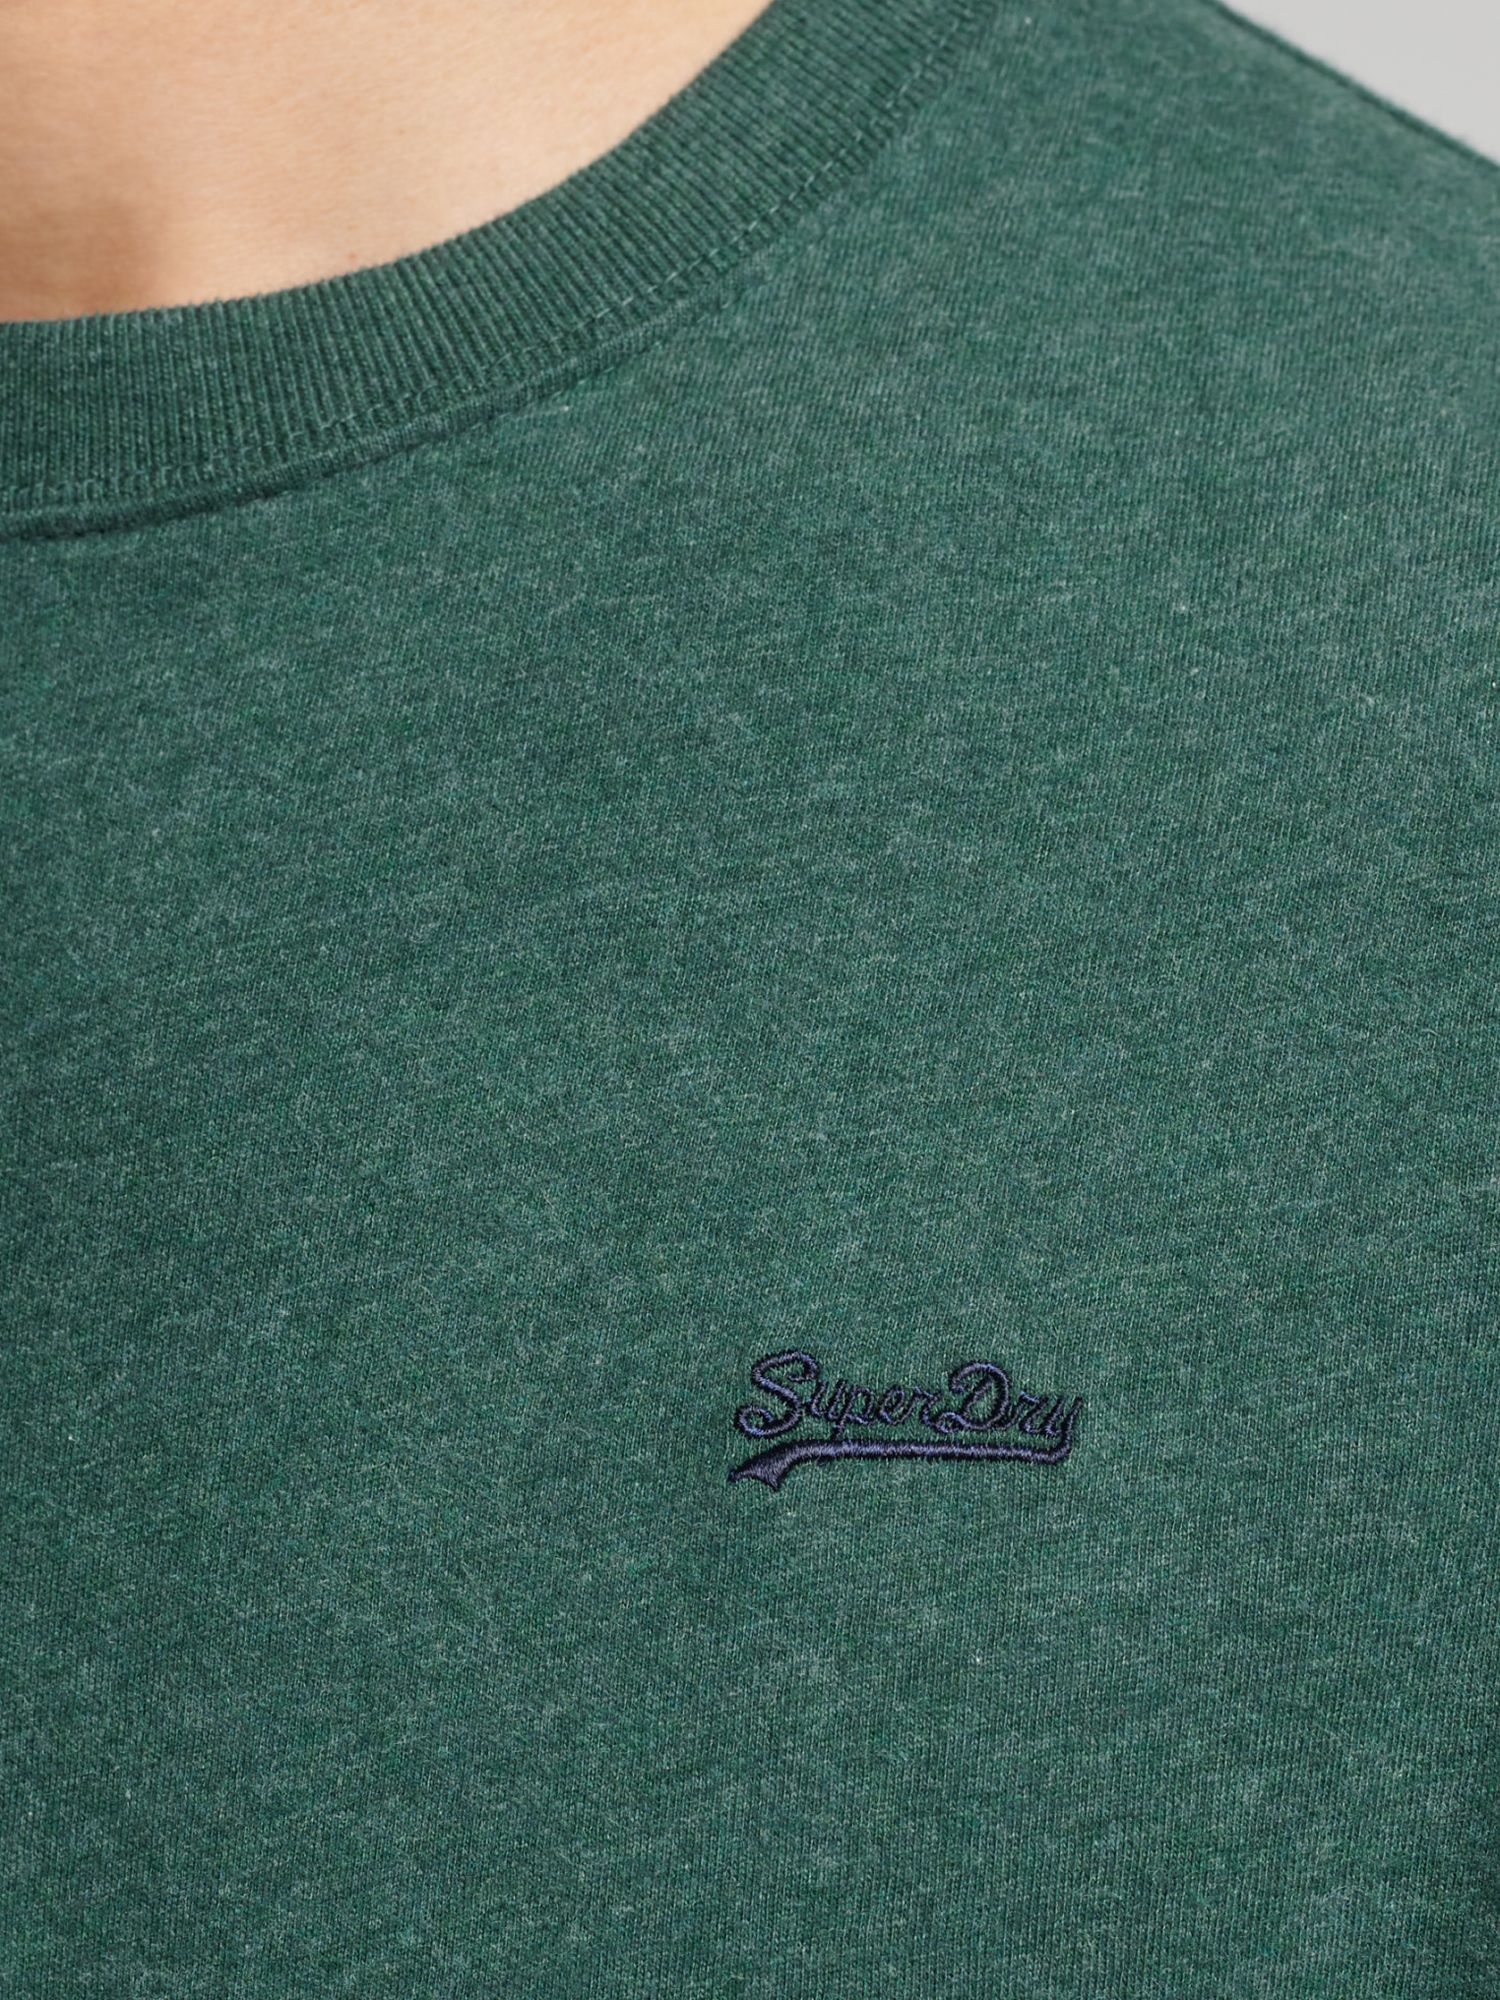 Buy Superdry Organic Cotton Micro Embroidered T-Shirt Online at johnlewis.com